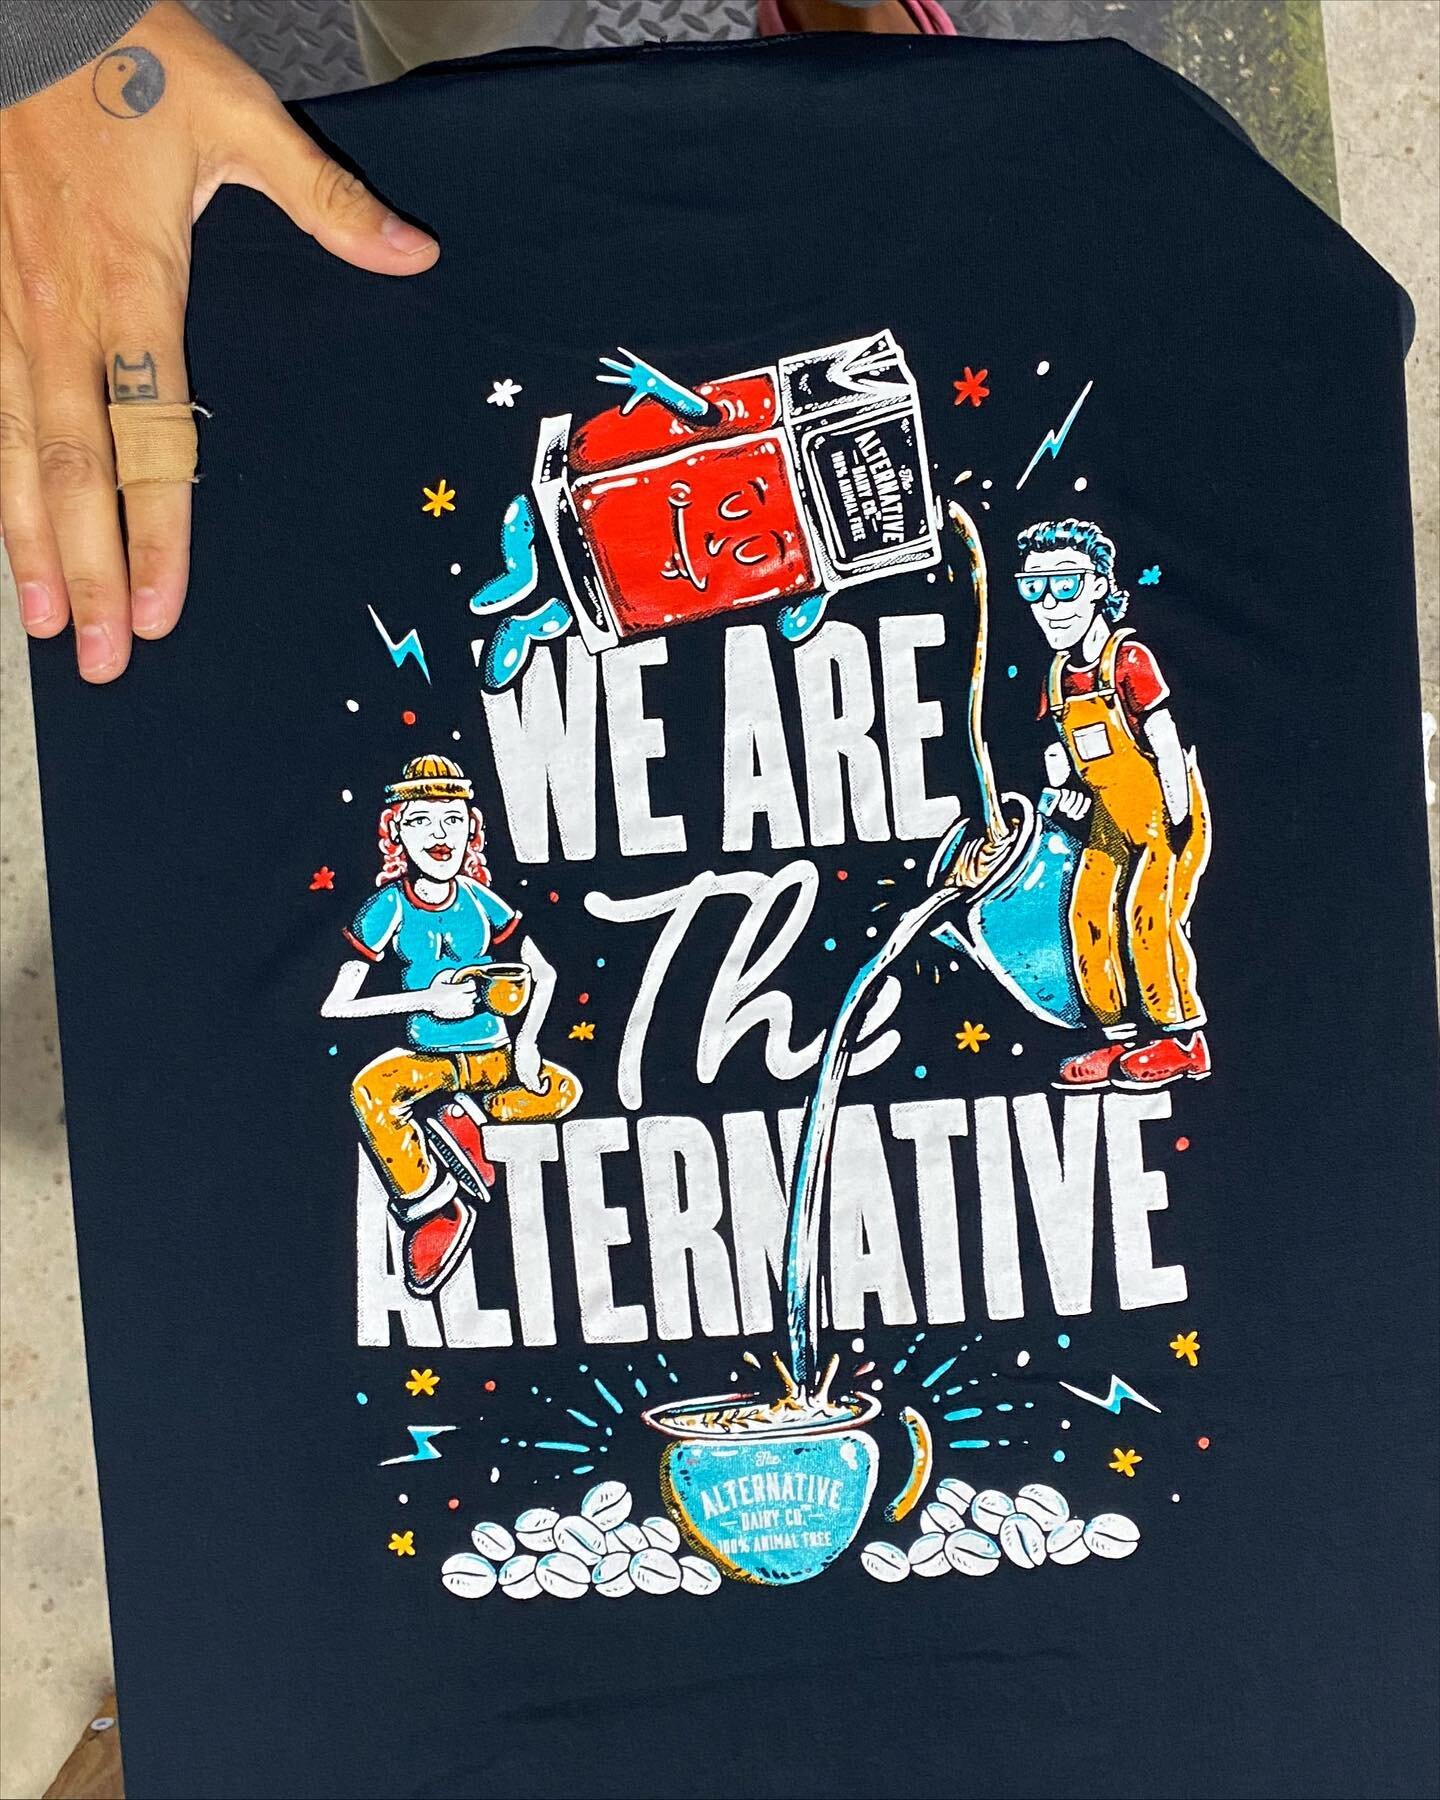 Just a good few for @thealternativedairyco 
Art by @biffybrentano